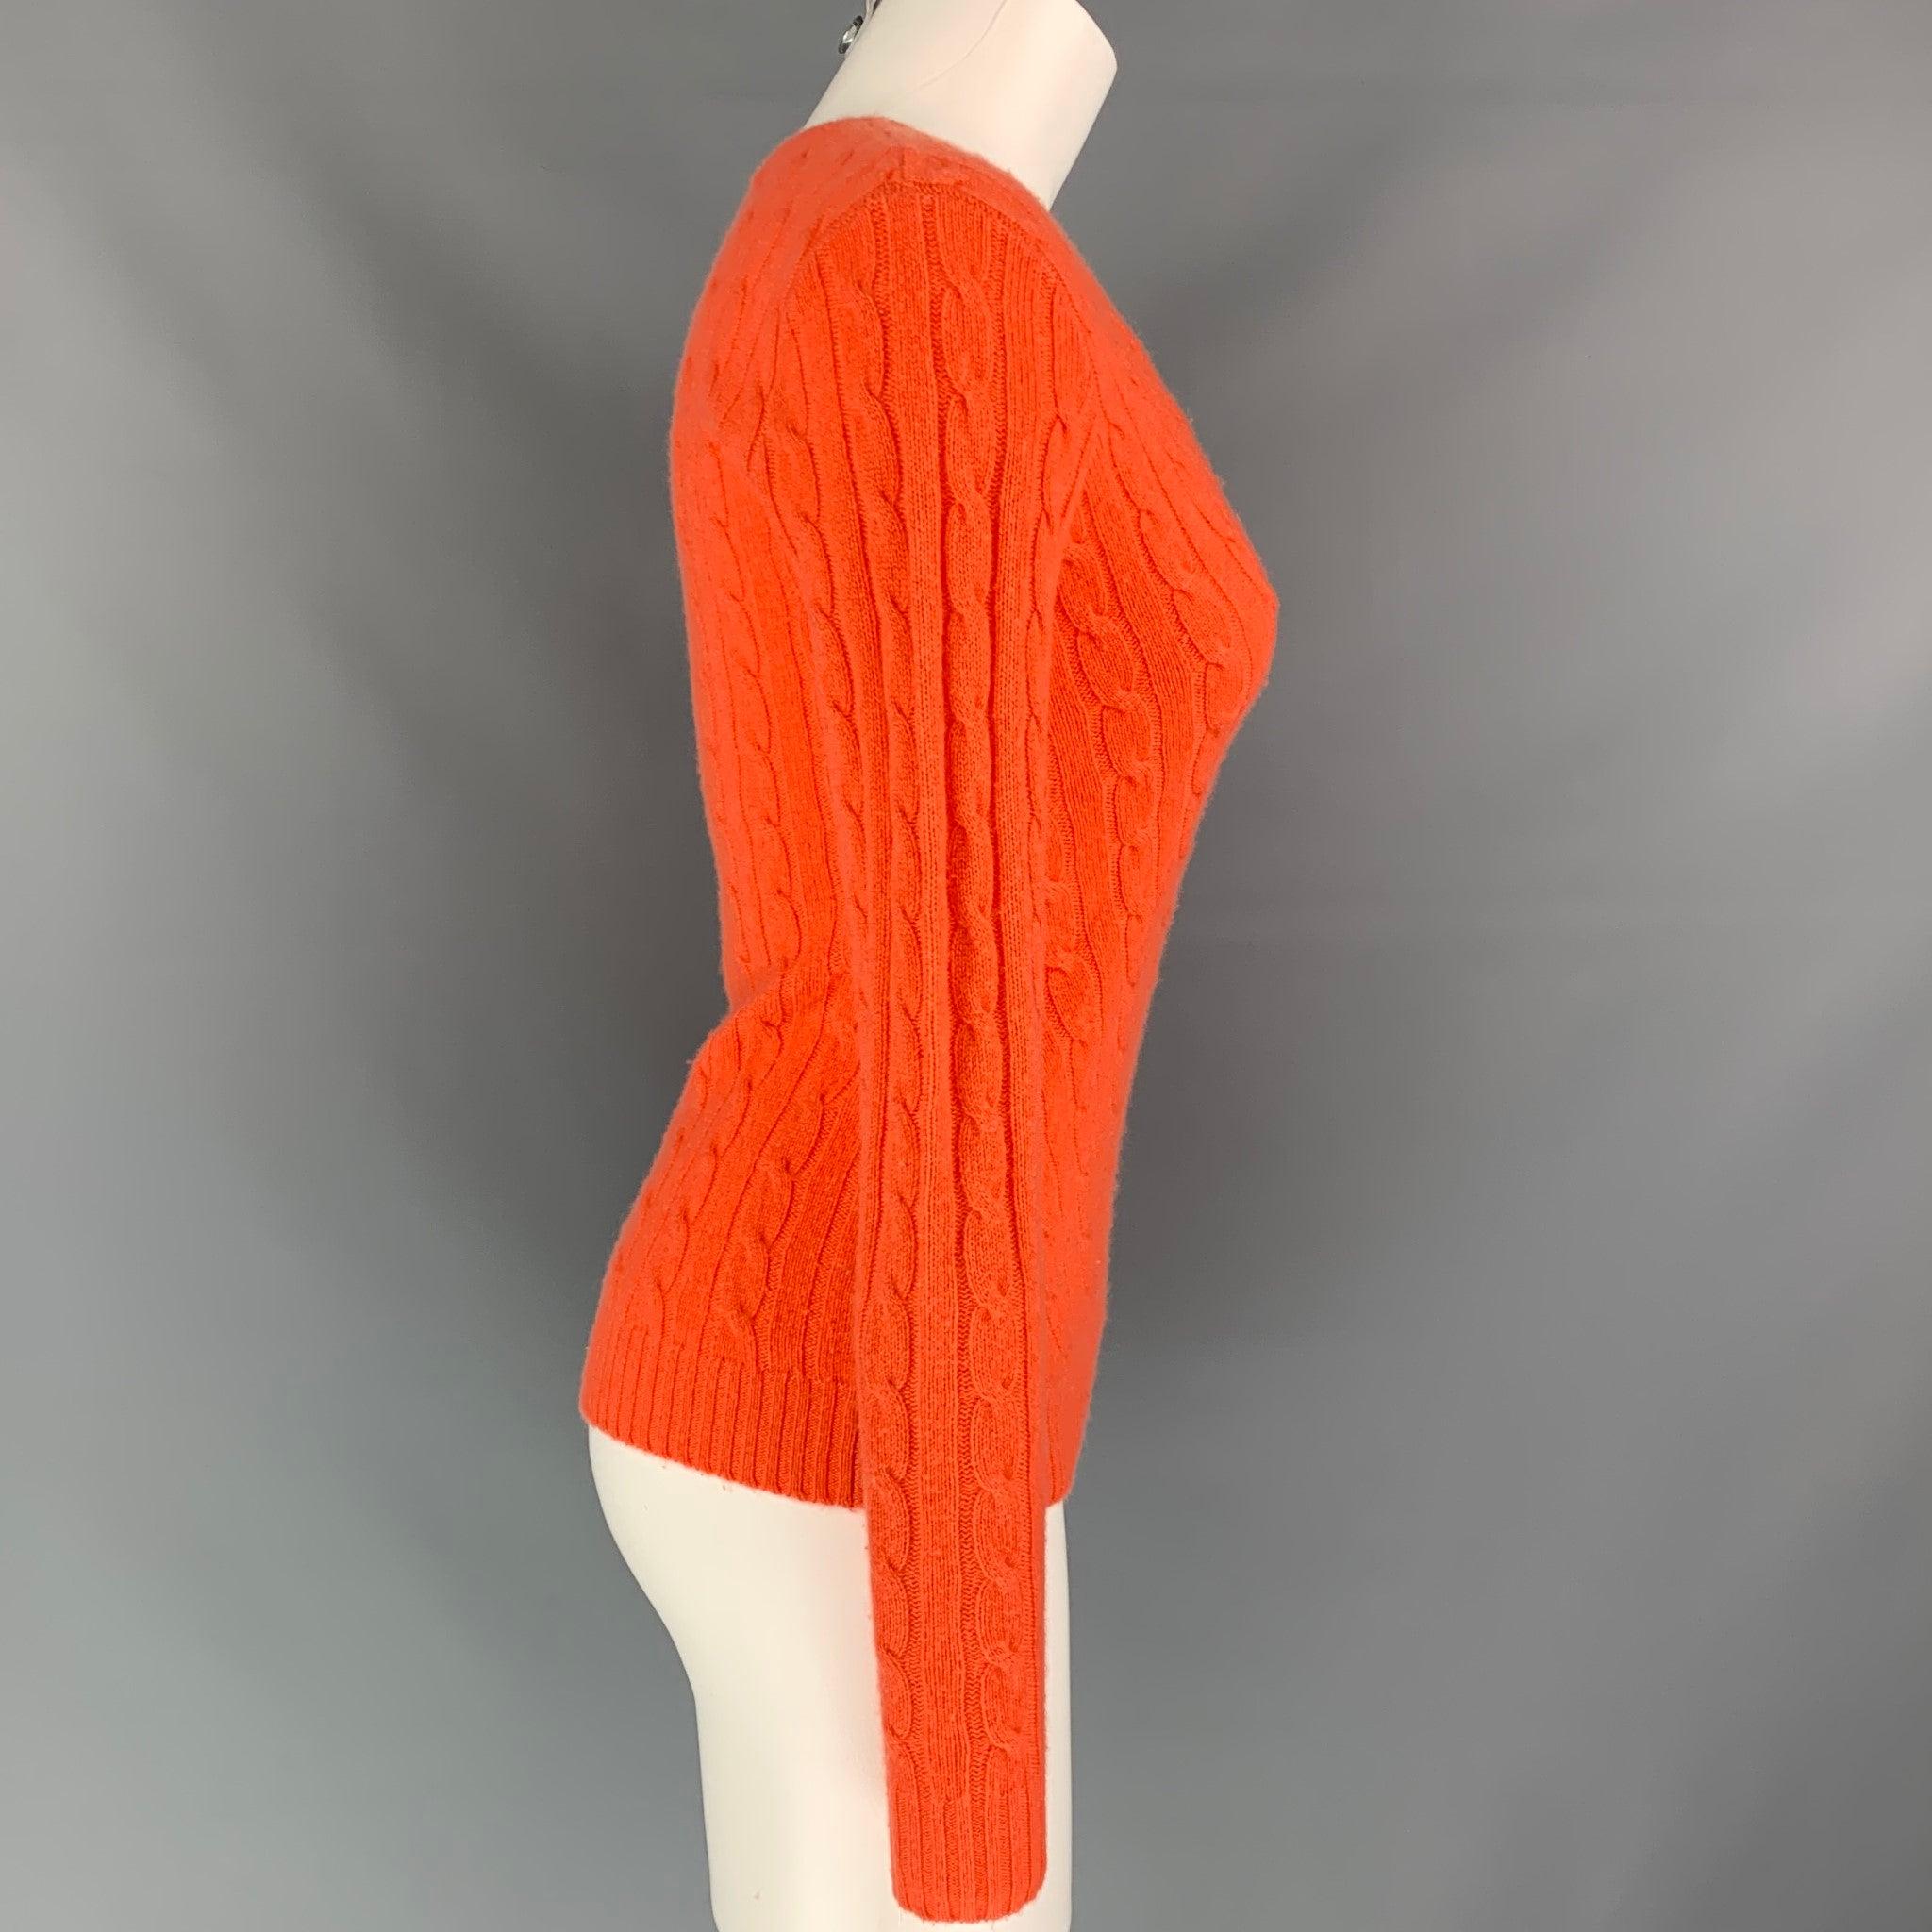 RALPH LAUREN Black Label sweater comes in a orange cable knit cashmere featuring a slim fit and a v-neck.
Very Good
Pre-Owned Condition. 

Marked:   S 

Measurements: 
 
Shoulder: 14.5 inches Bust: 36 inches  Sleeve: 26 inches  Length: 23 inches 

 